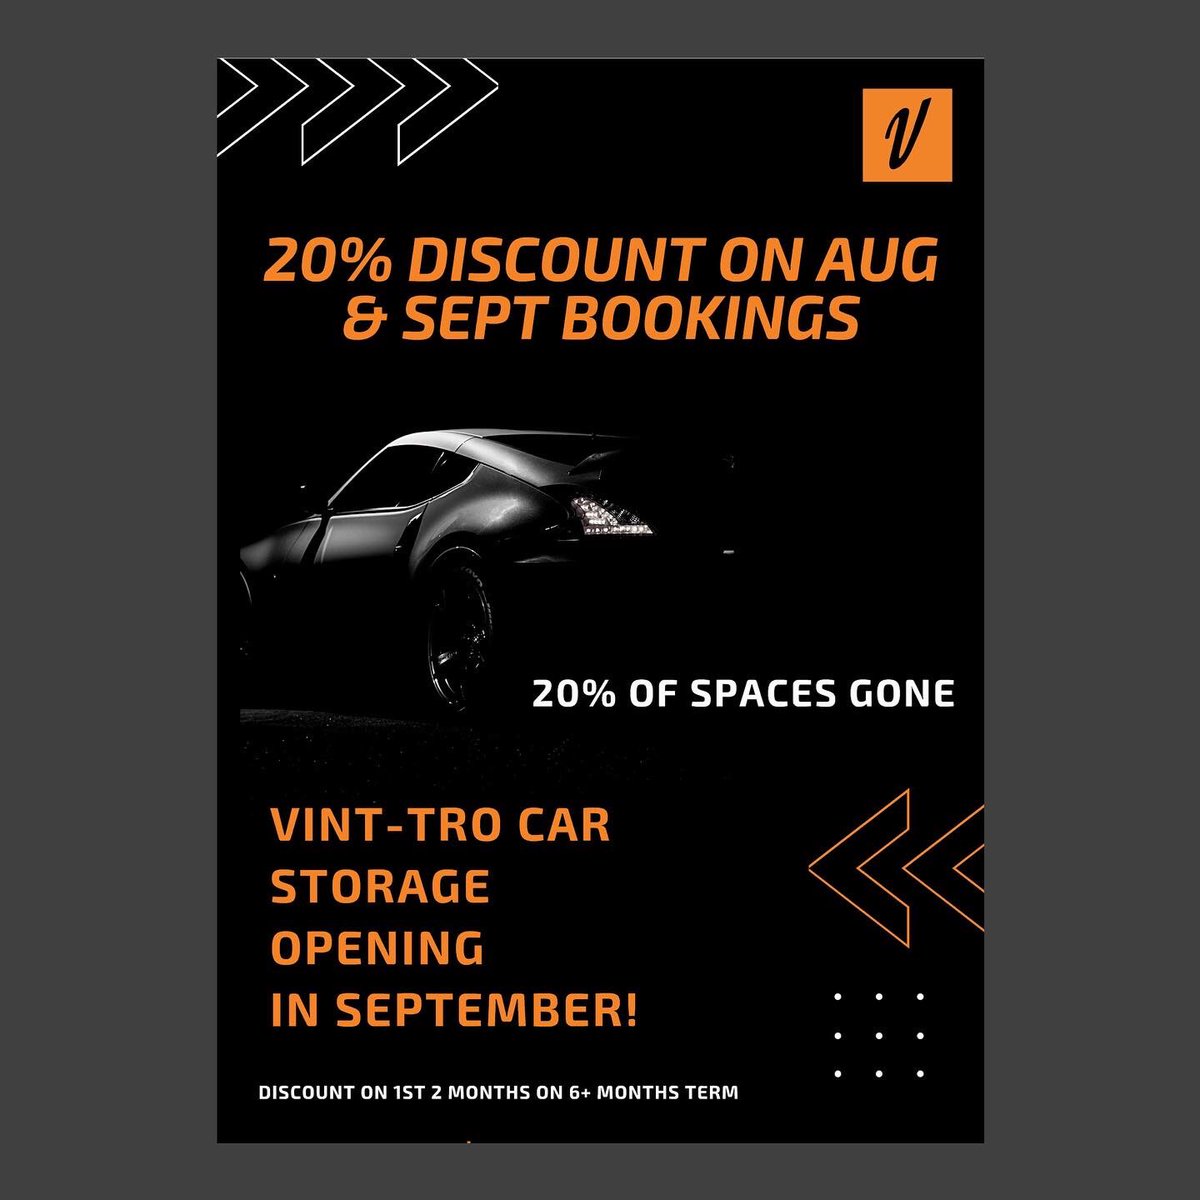 The guys from @Vint_Tro are joining us again on 6th September at our show. Find out about their new service: secure vehicle storage in Suffolk. Special launch deal on now. Details attached. #suffolk #supercars #classiccar #carstorage #bikestorage #vinttro #classicsatglemham